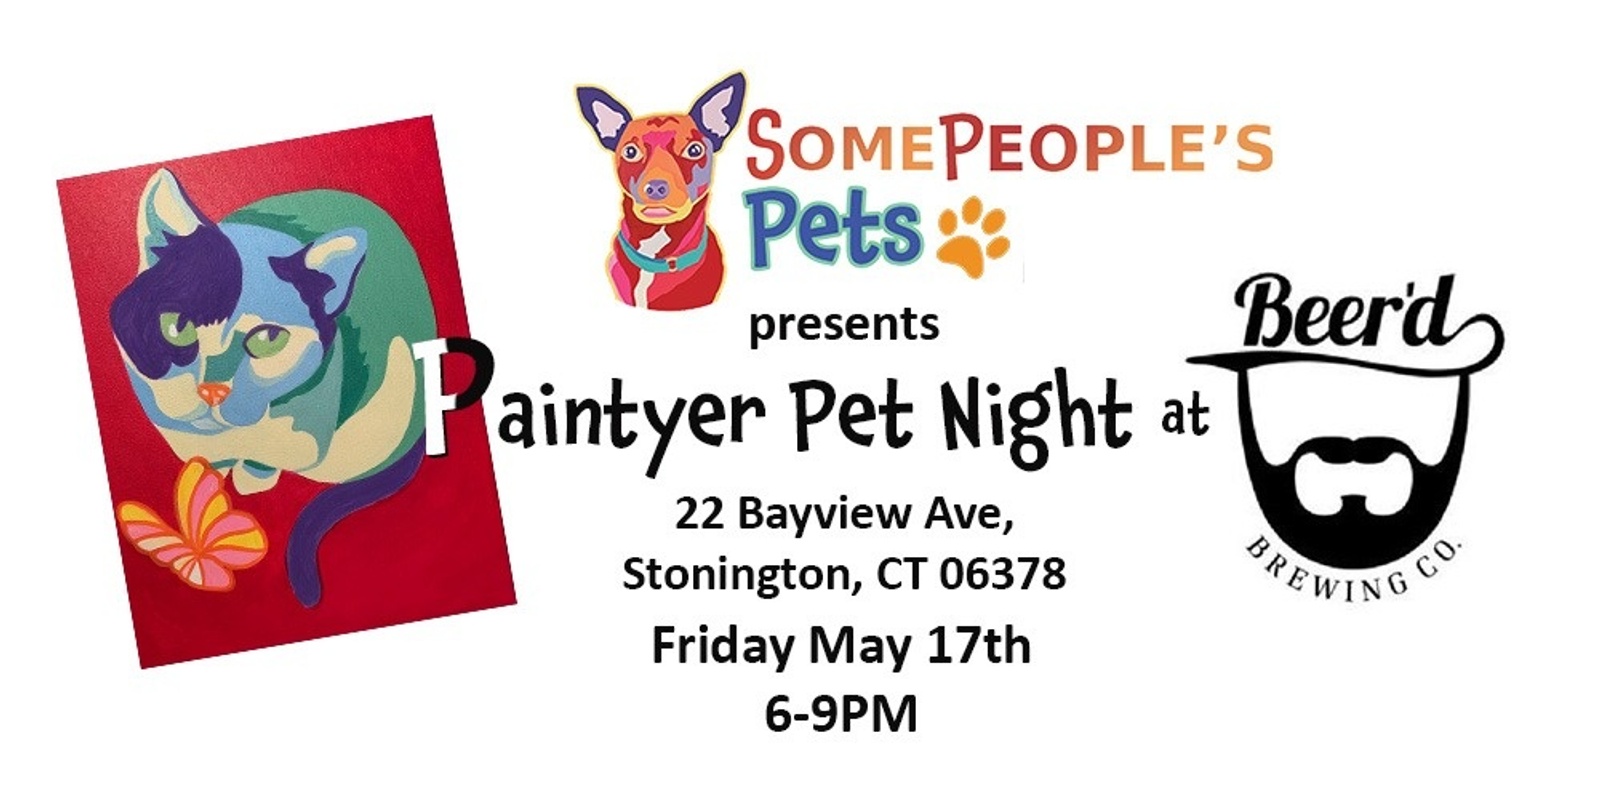 Banner image for Paintyer Pet Night at Beer'd Brewing in Stonington Ct.